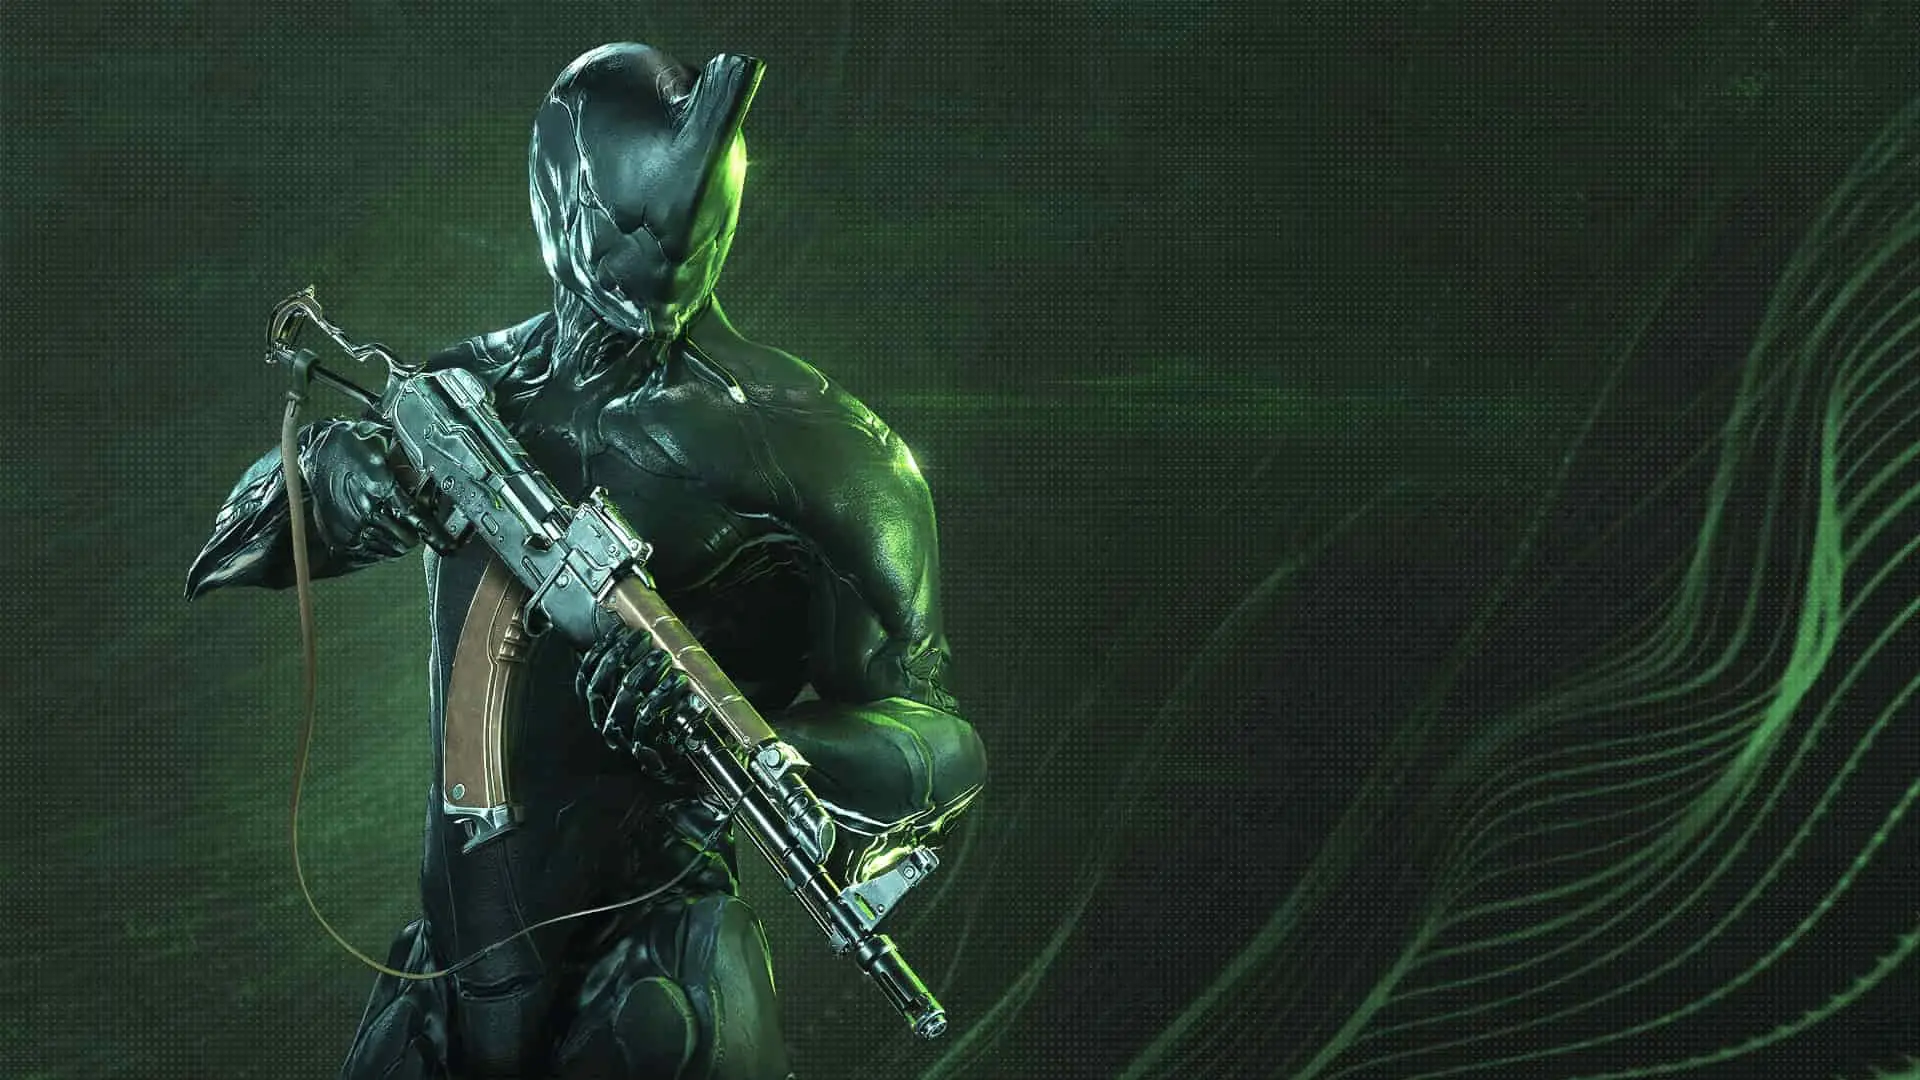 A Warframe character holding the AX-52 Rifle at the ready.